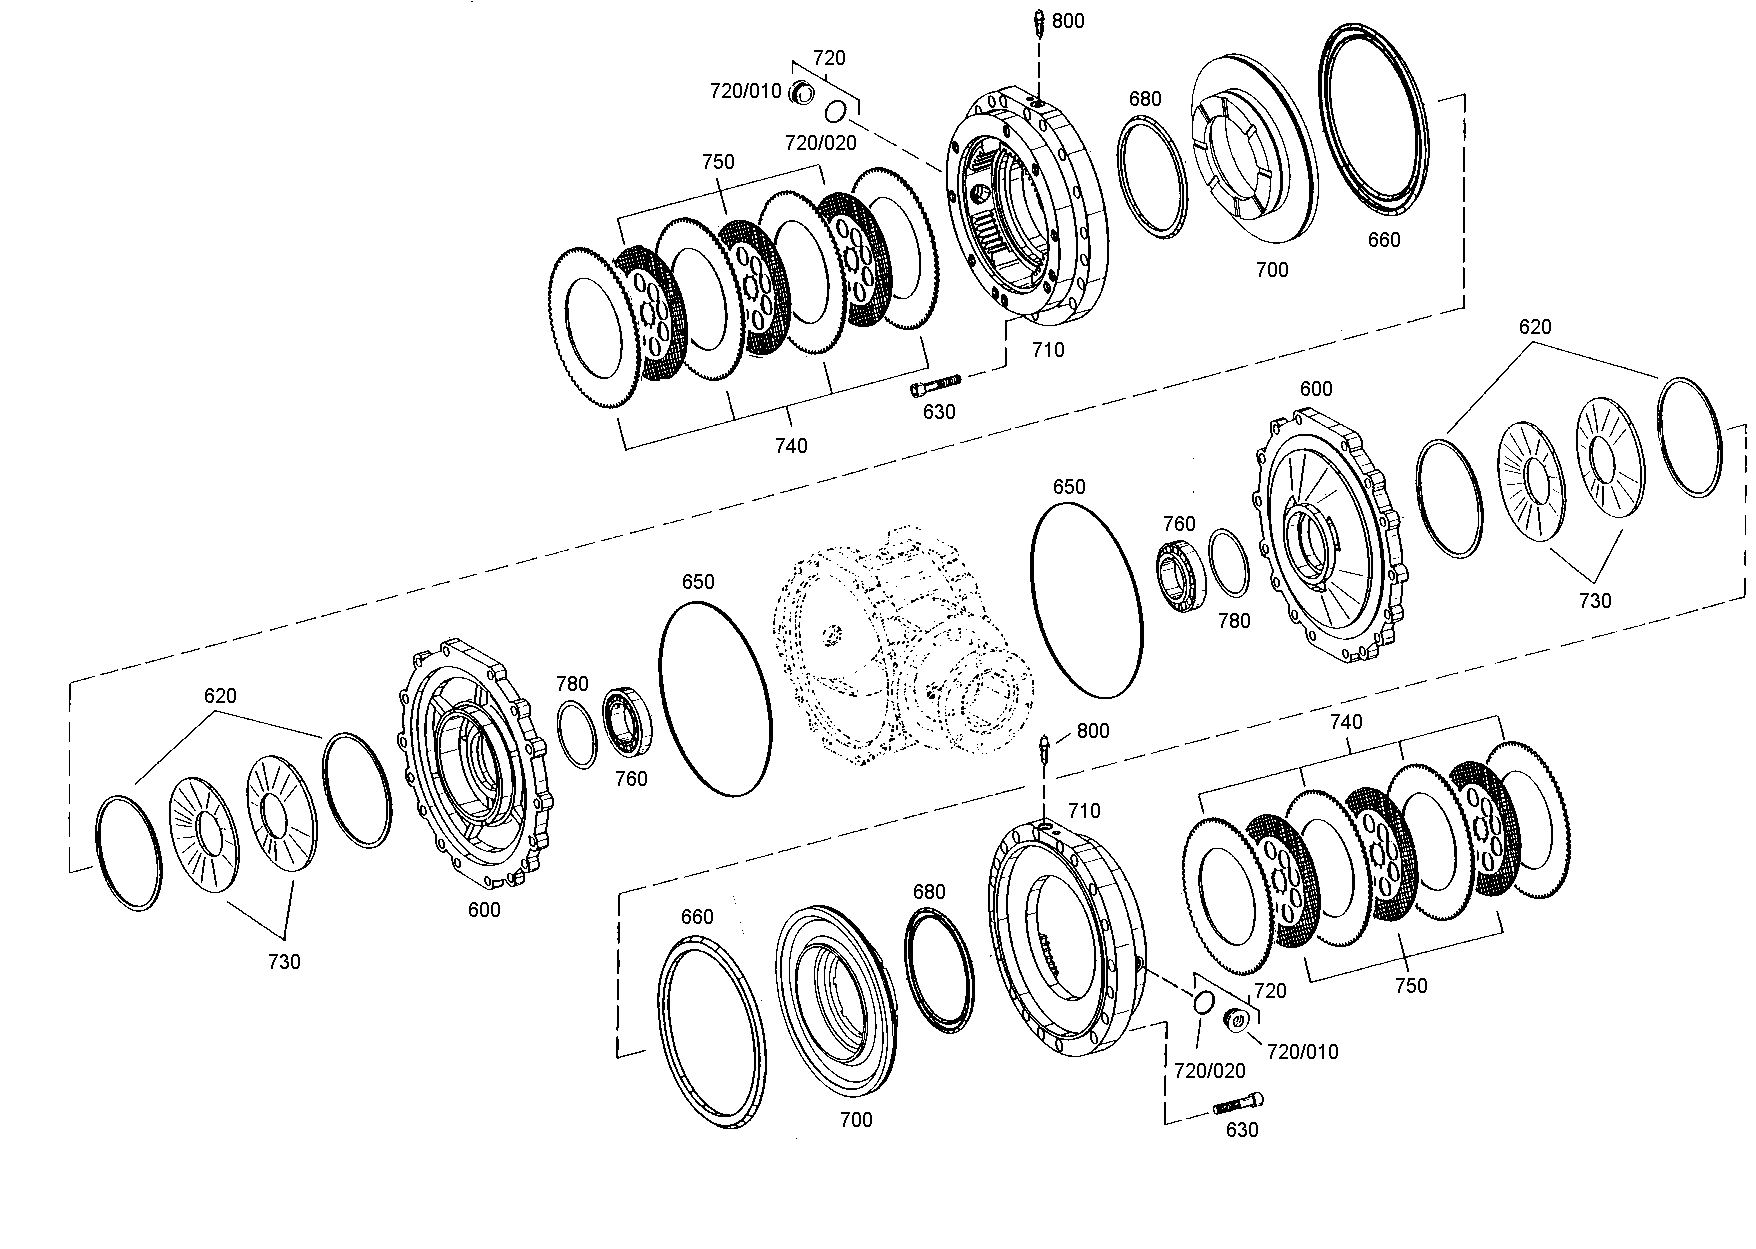 drawing for HAMM AG 1282085 - WASHER (figure 4)